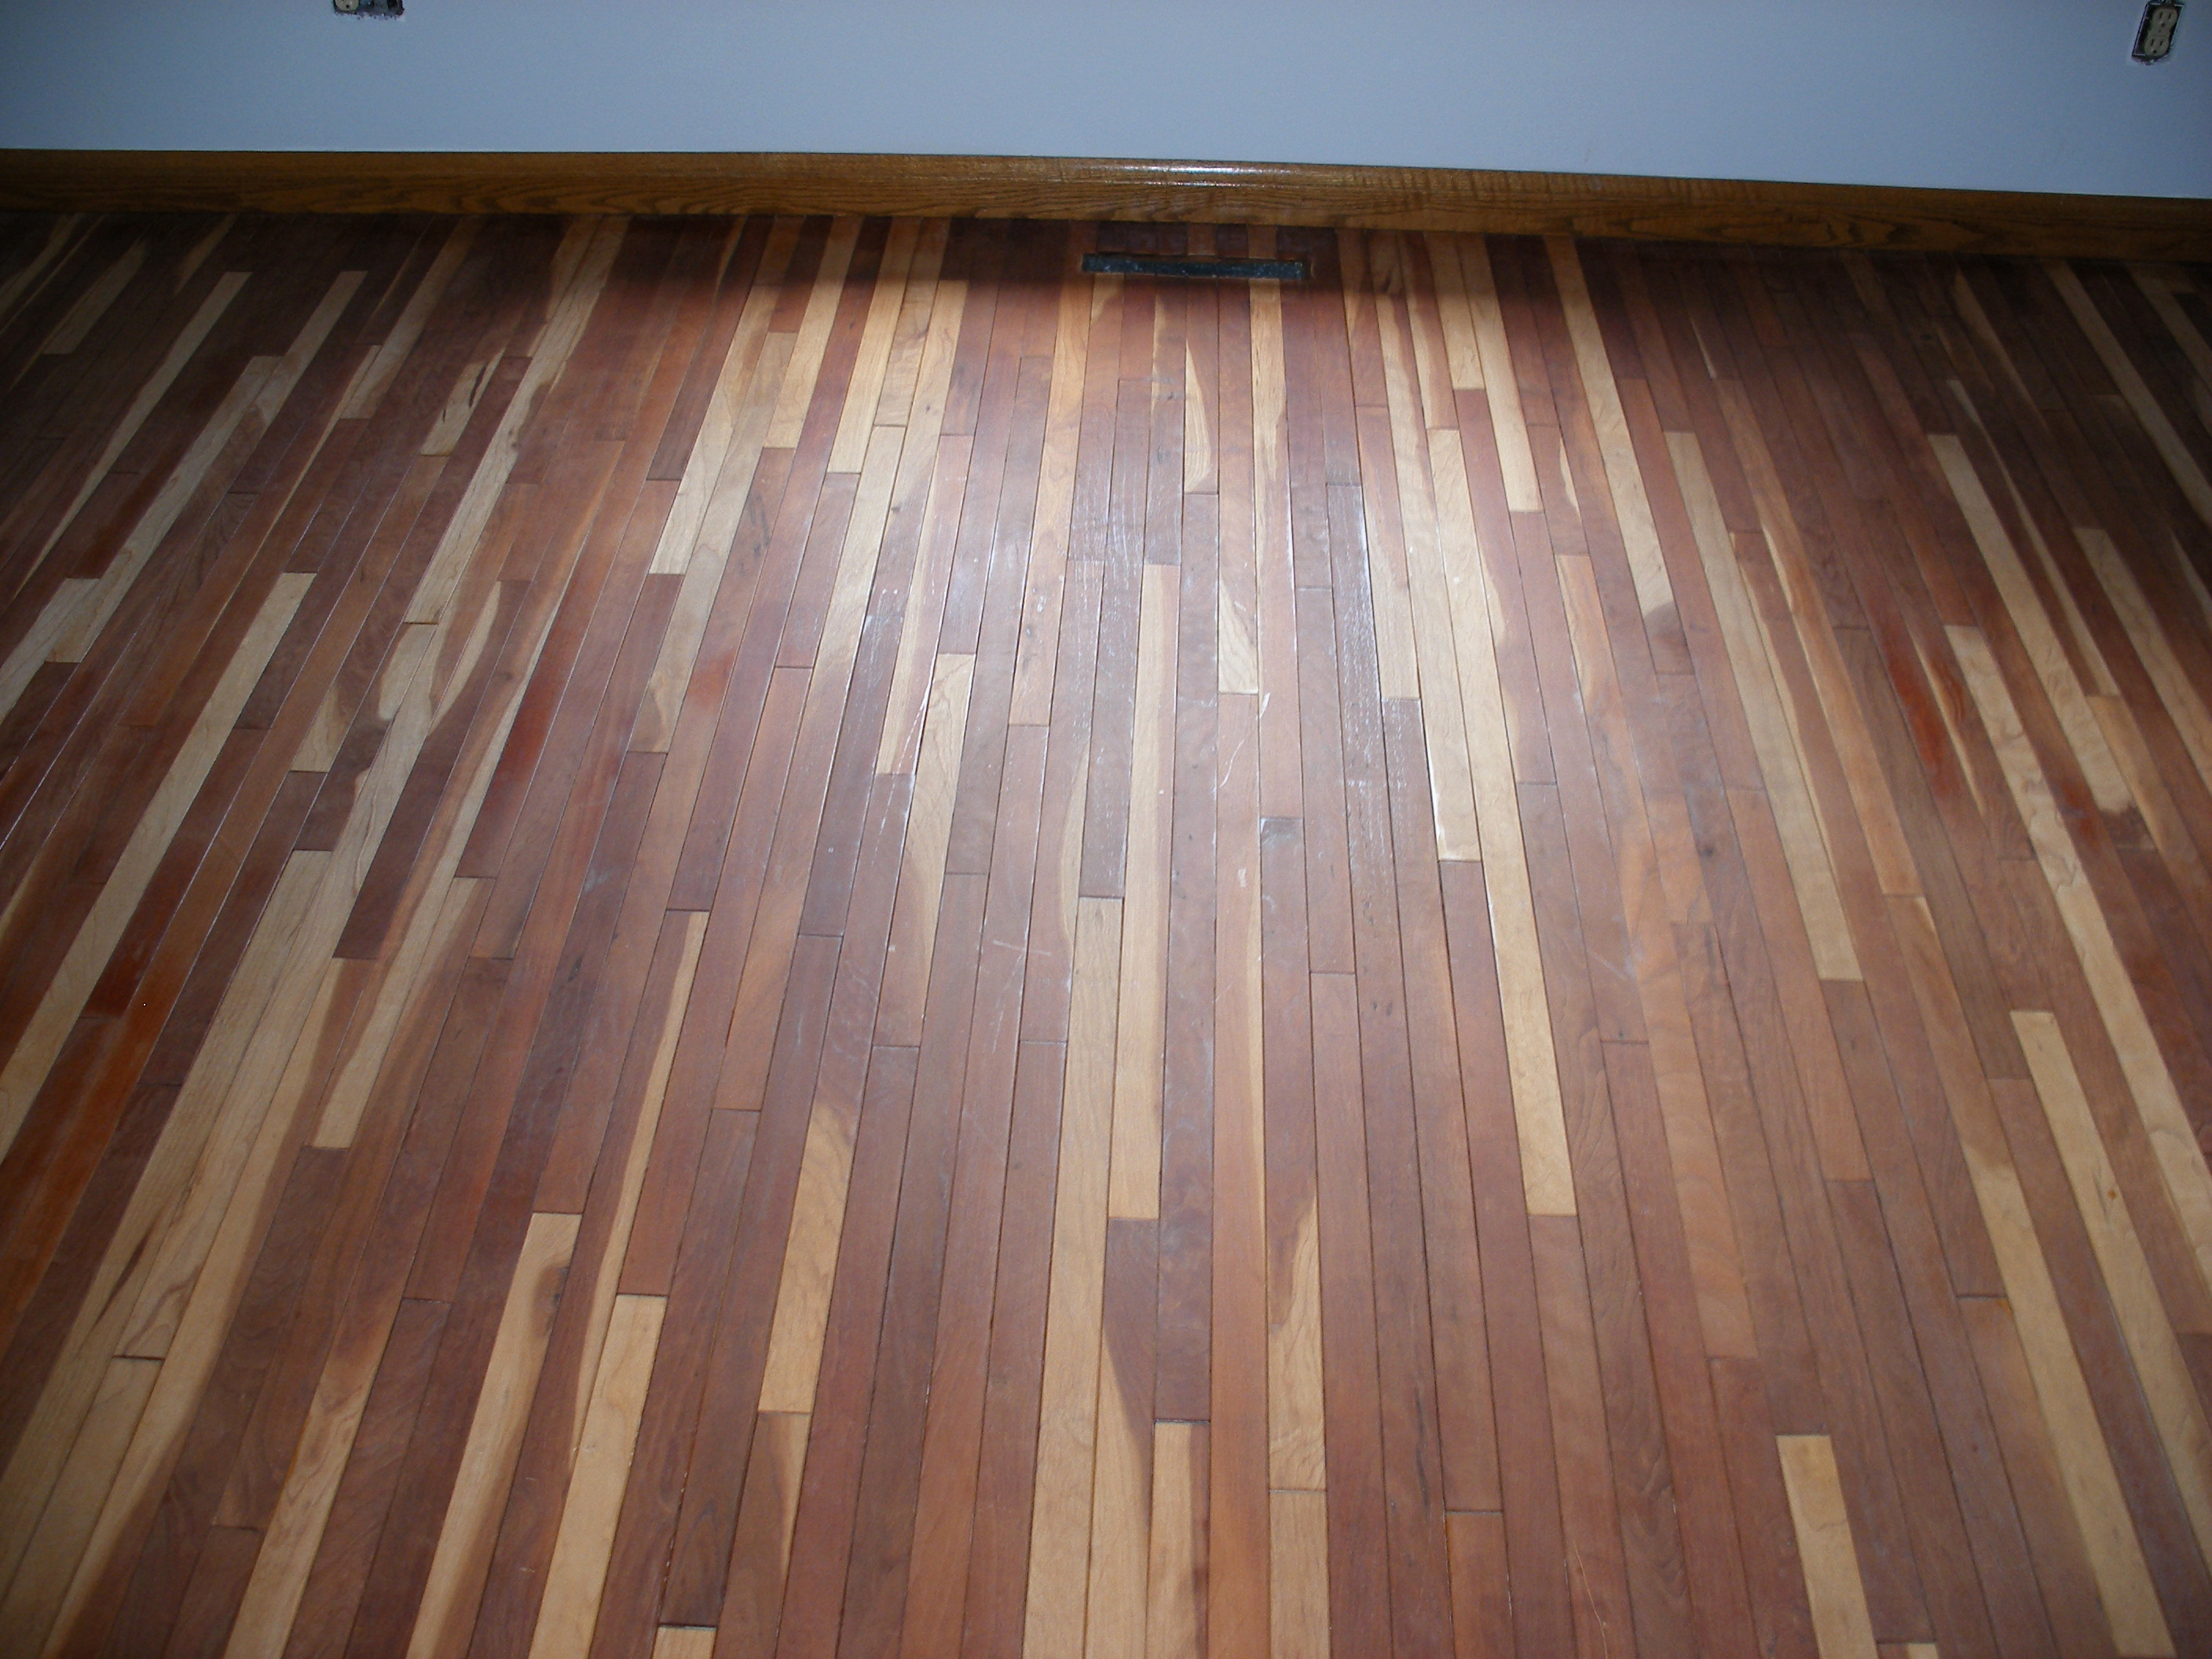 17 Unique Sanding and Restaining Hardwood Floors Cost 2024 free download sanding and restaining hardwood floors cost of refinishing hardwood floors without sanding picture of how to pertaining to refinishing hardwood floors without sanding new no sand wood floor 